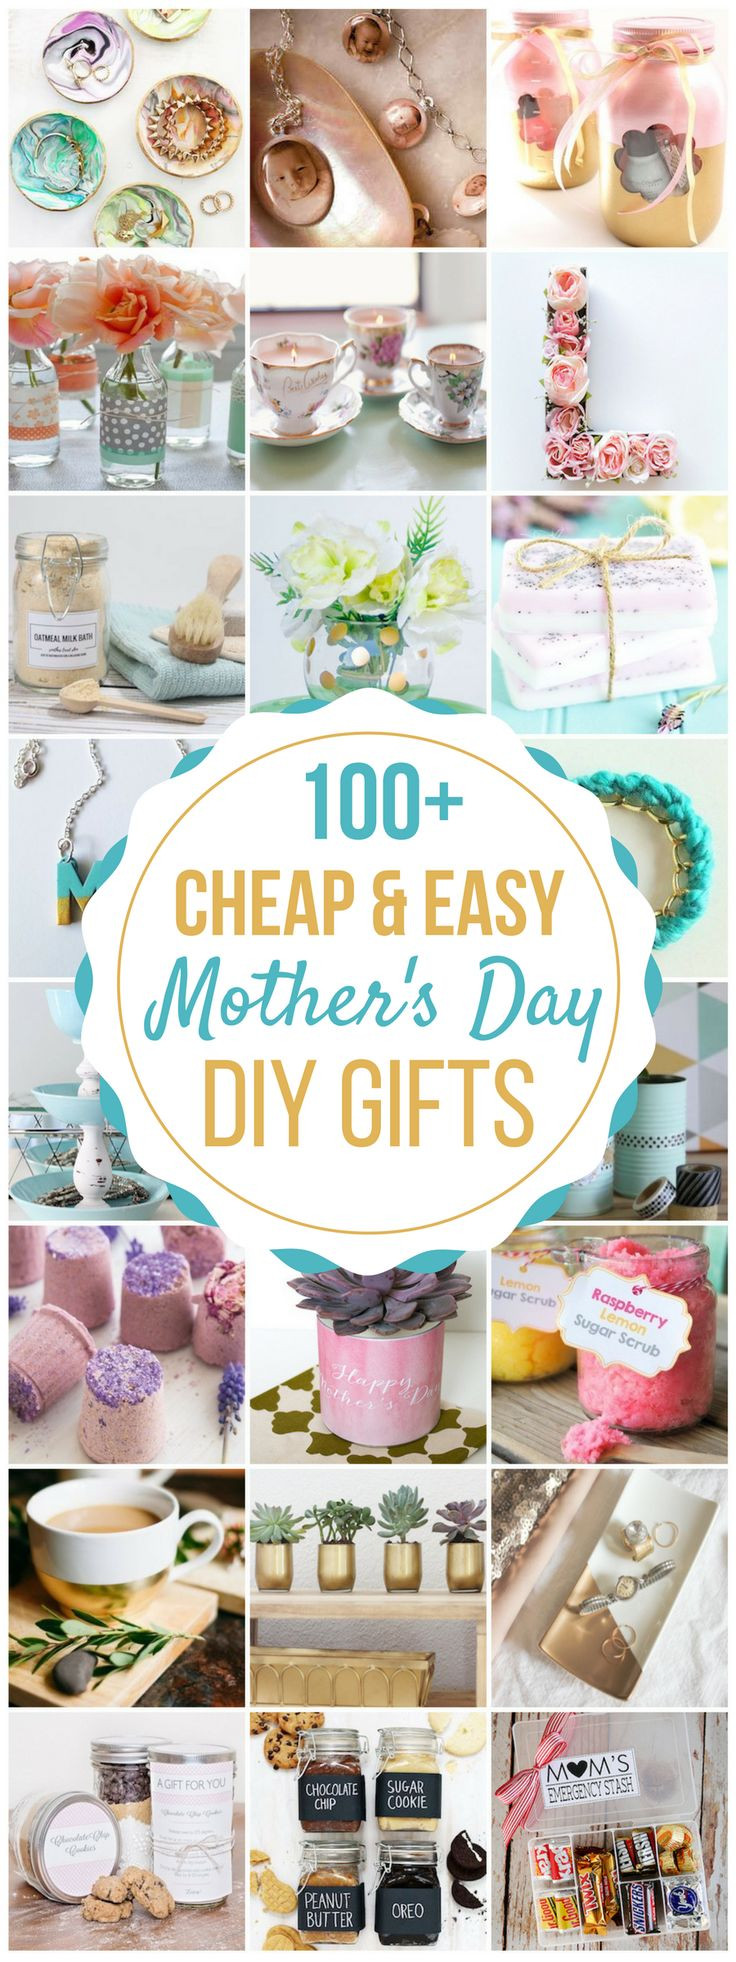 Easy Diy Mother's Day Gifts
 17 Best images about Homemade Gift Ideas on Pinterest